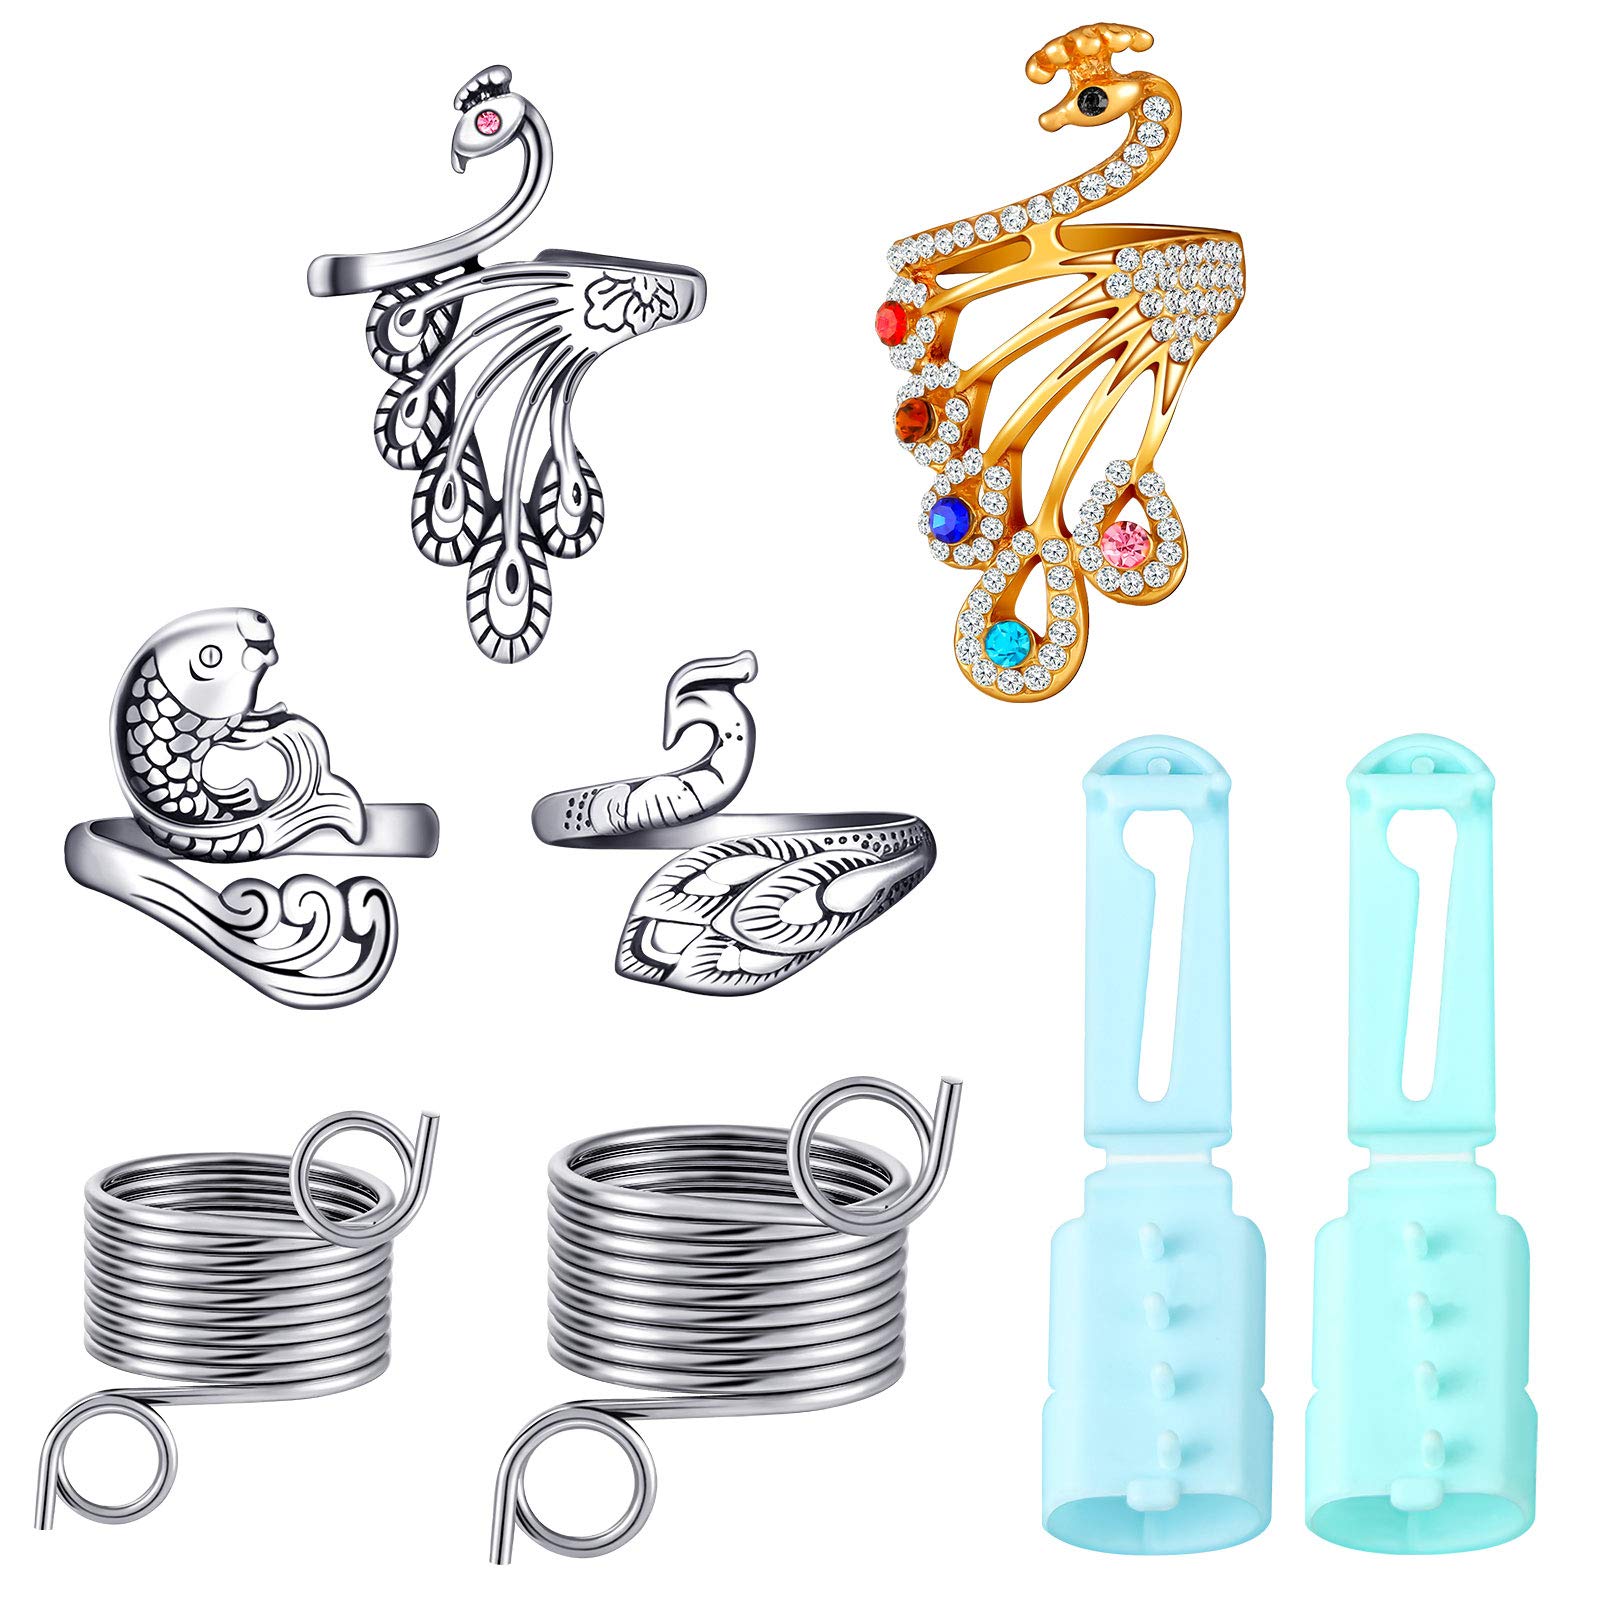 1Pc Adjustable Knitting Loop Crochet Ring Knitting Accessories Octopus Ring  for Yarn Guide Finger Holder Knitting Tool - AliExpress